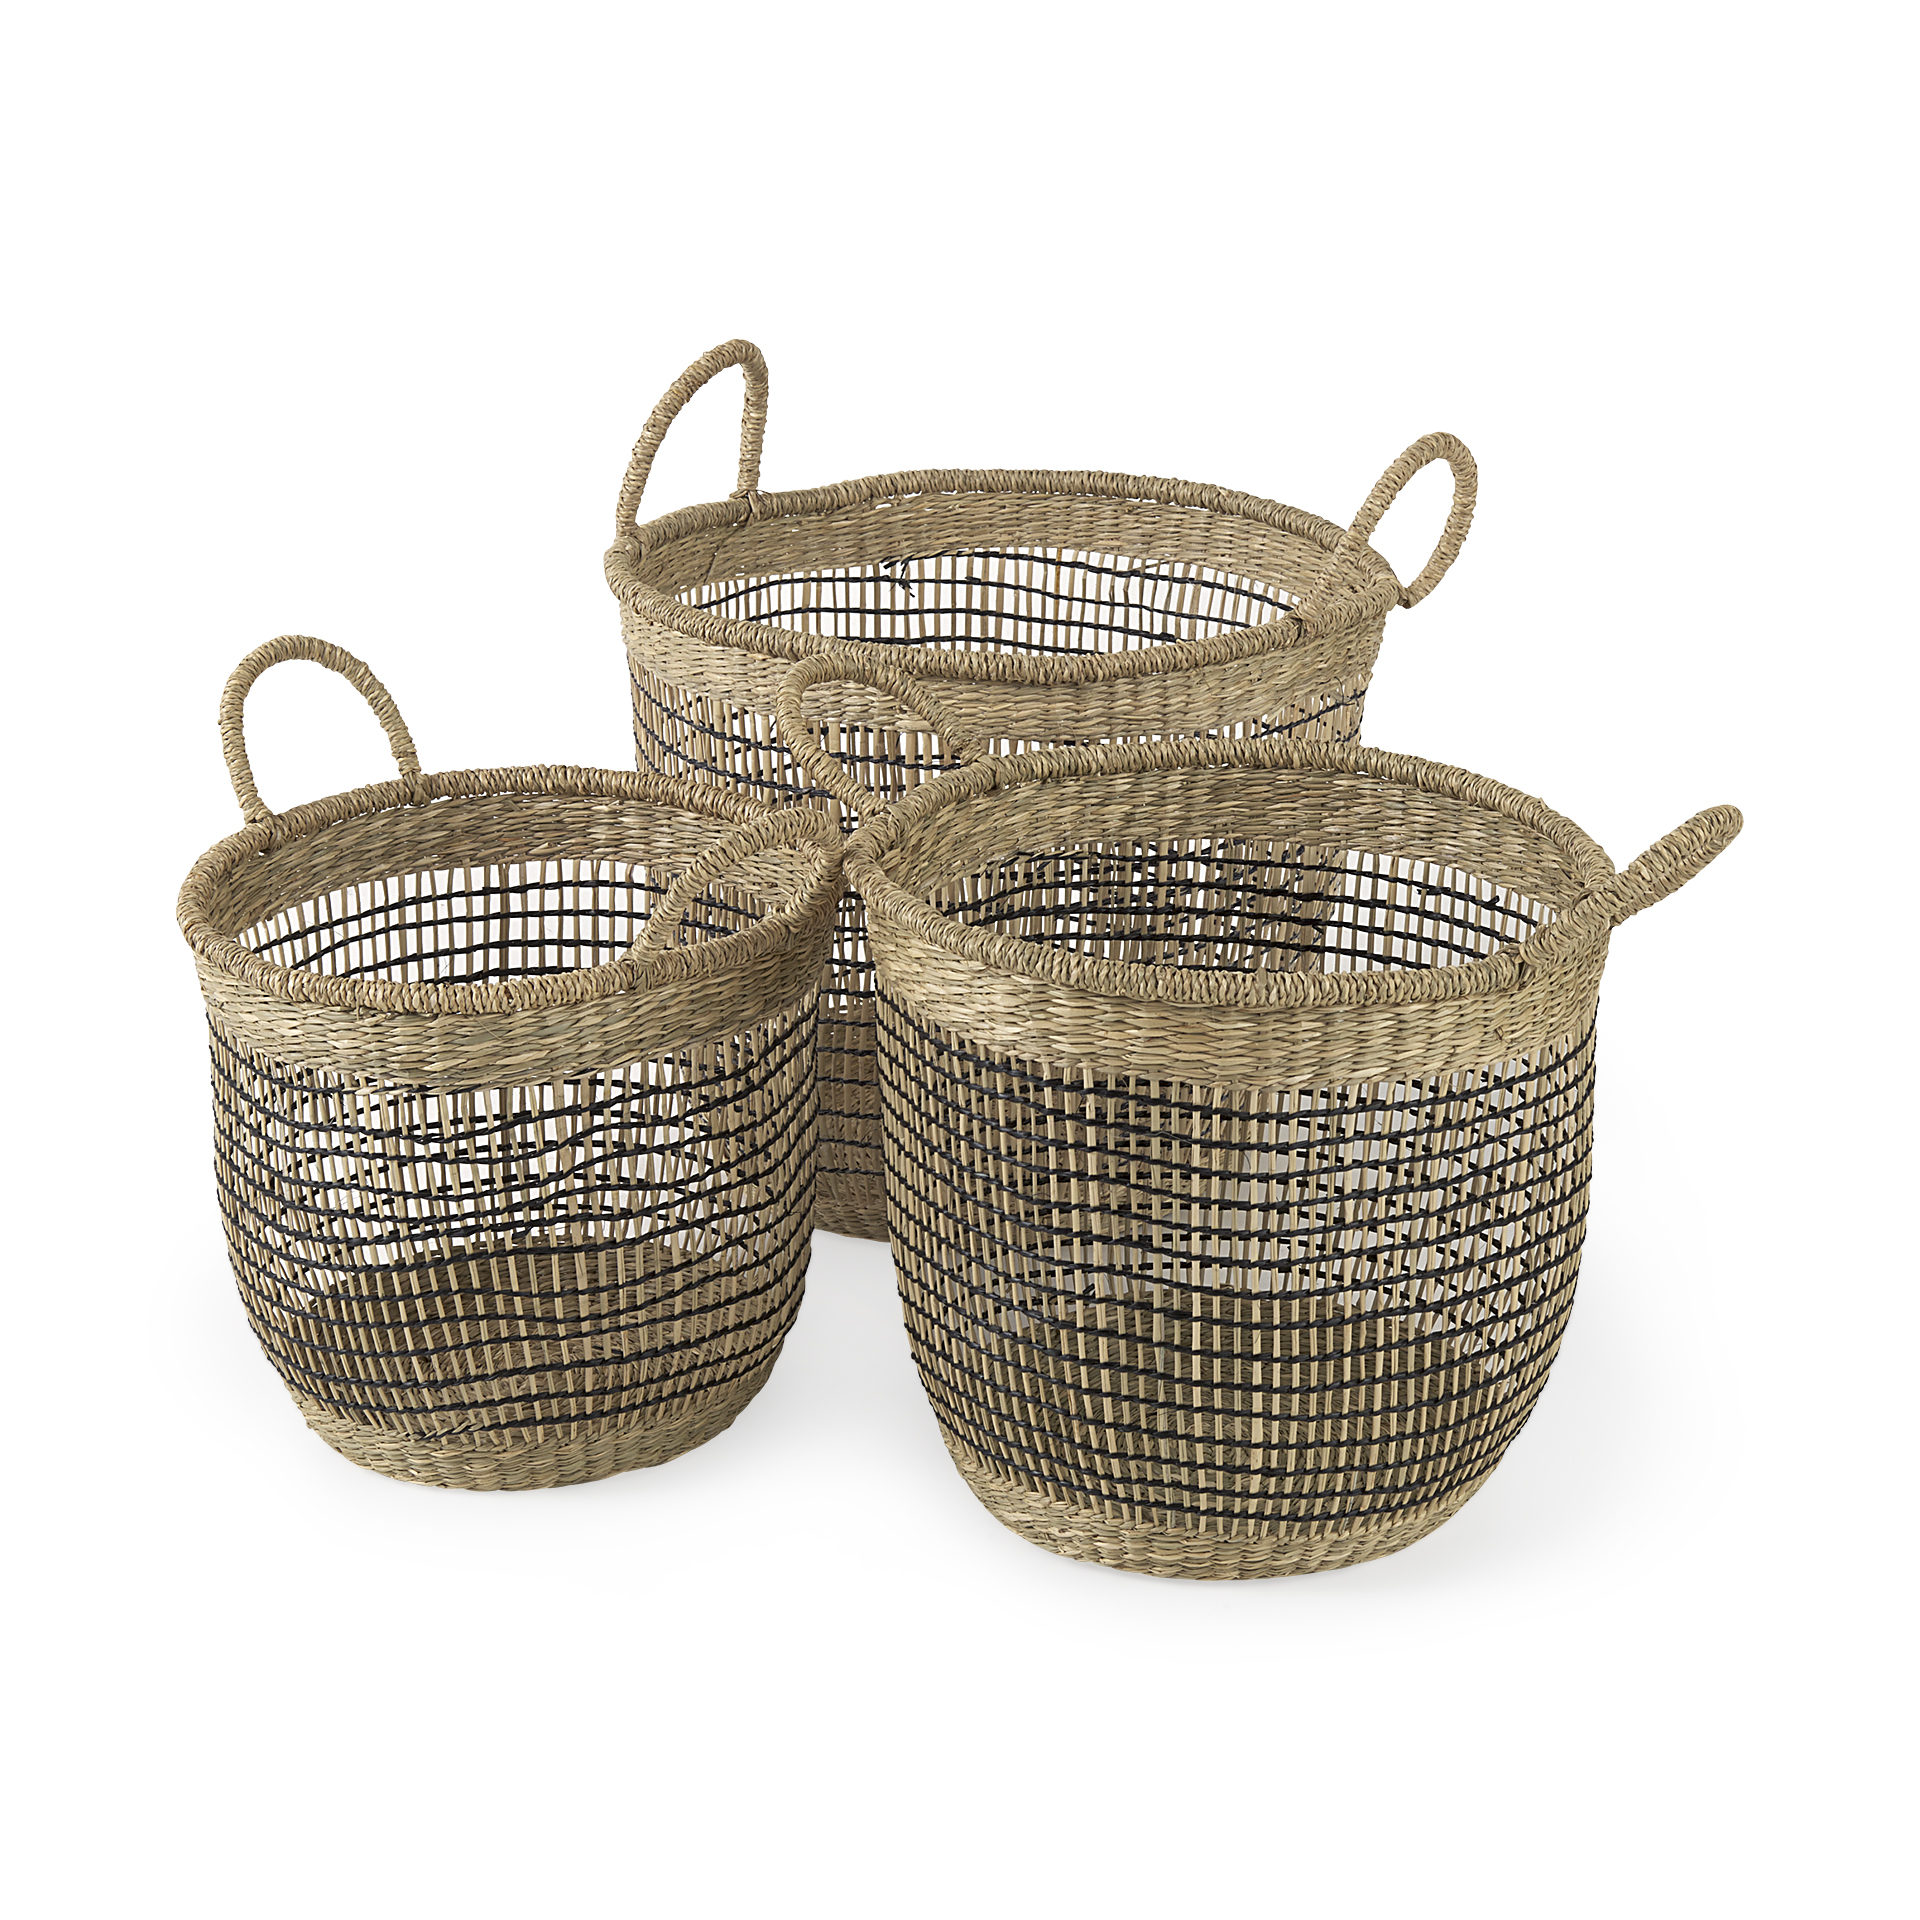 Brown Seagrass | Set of 3